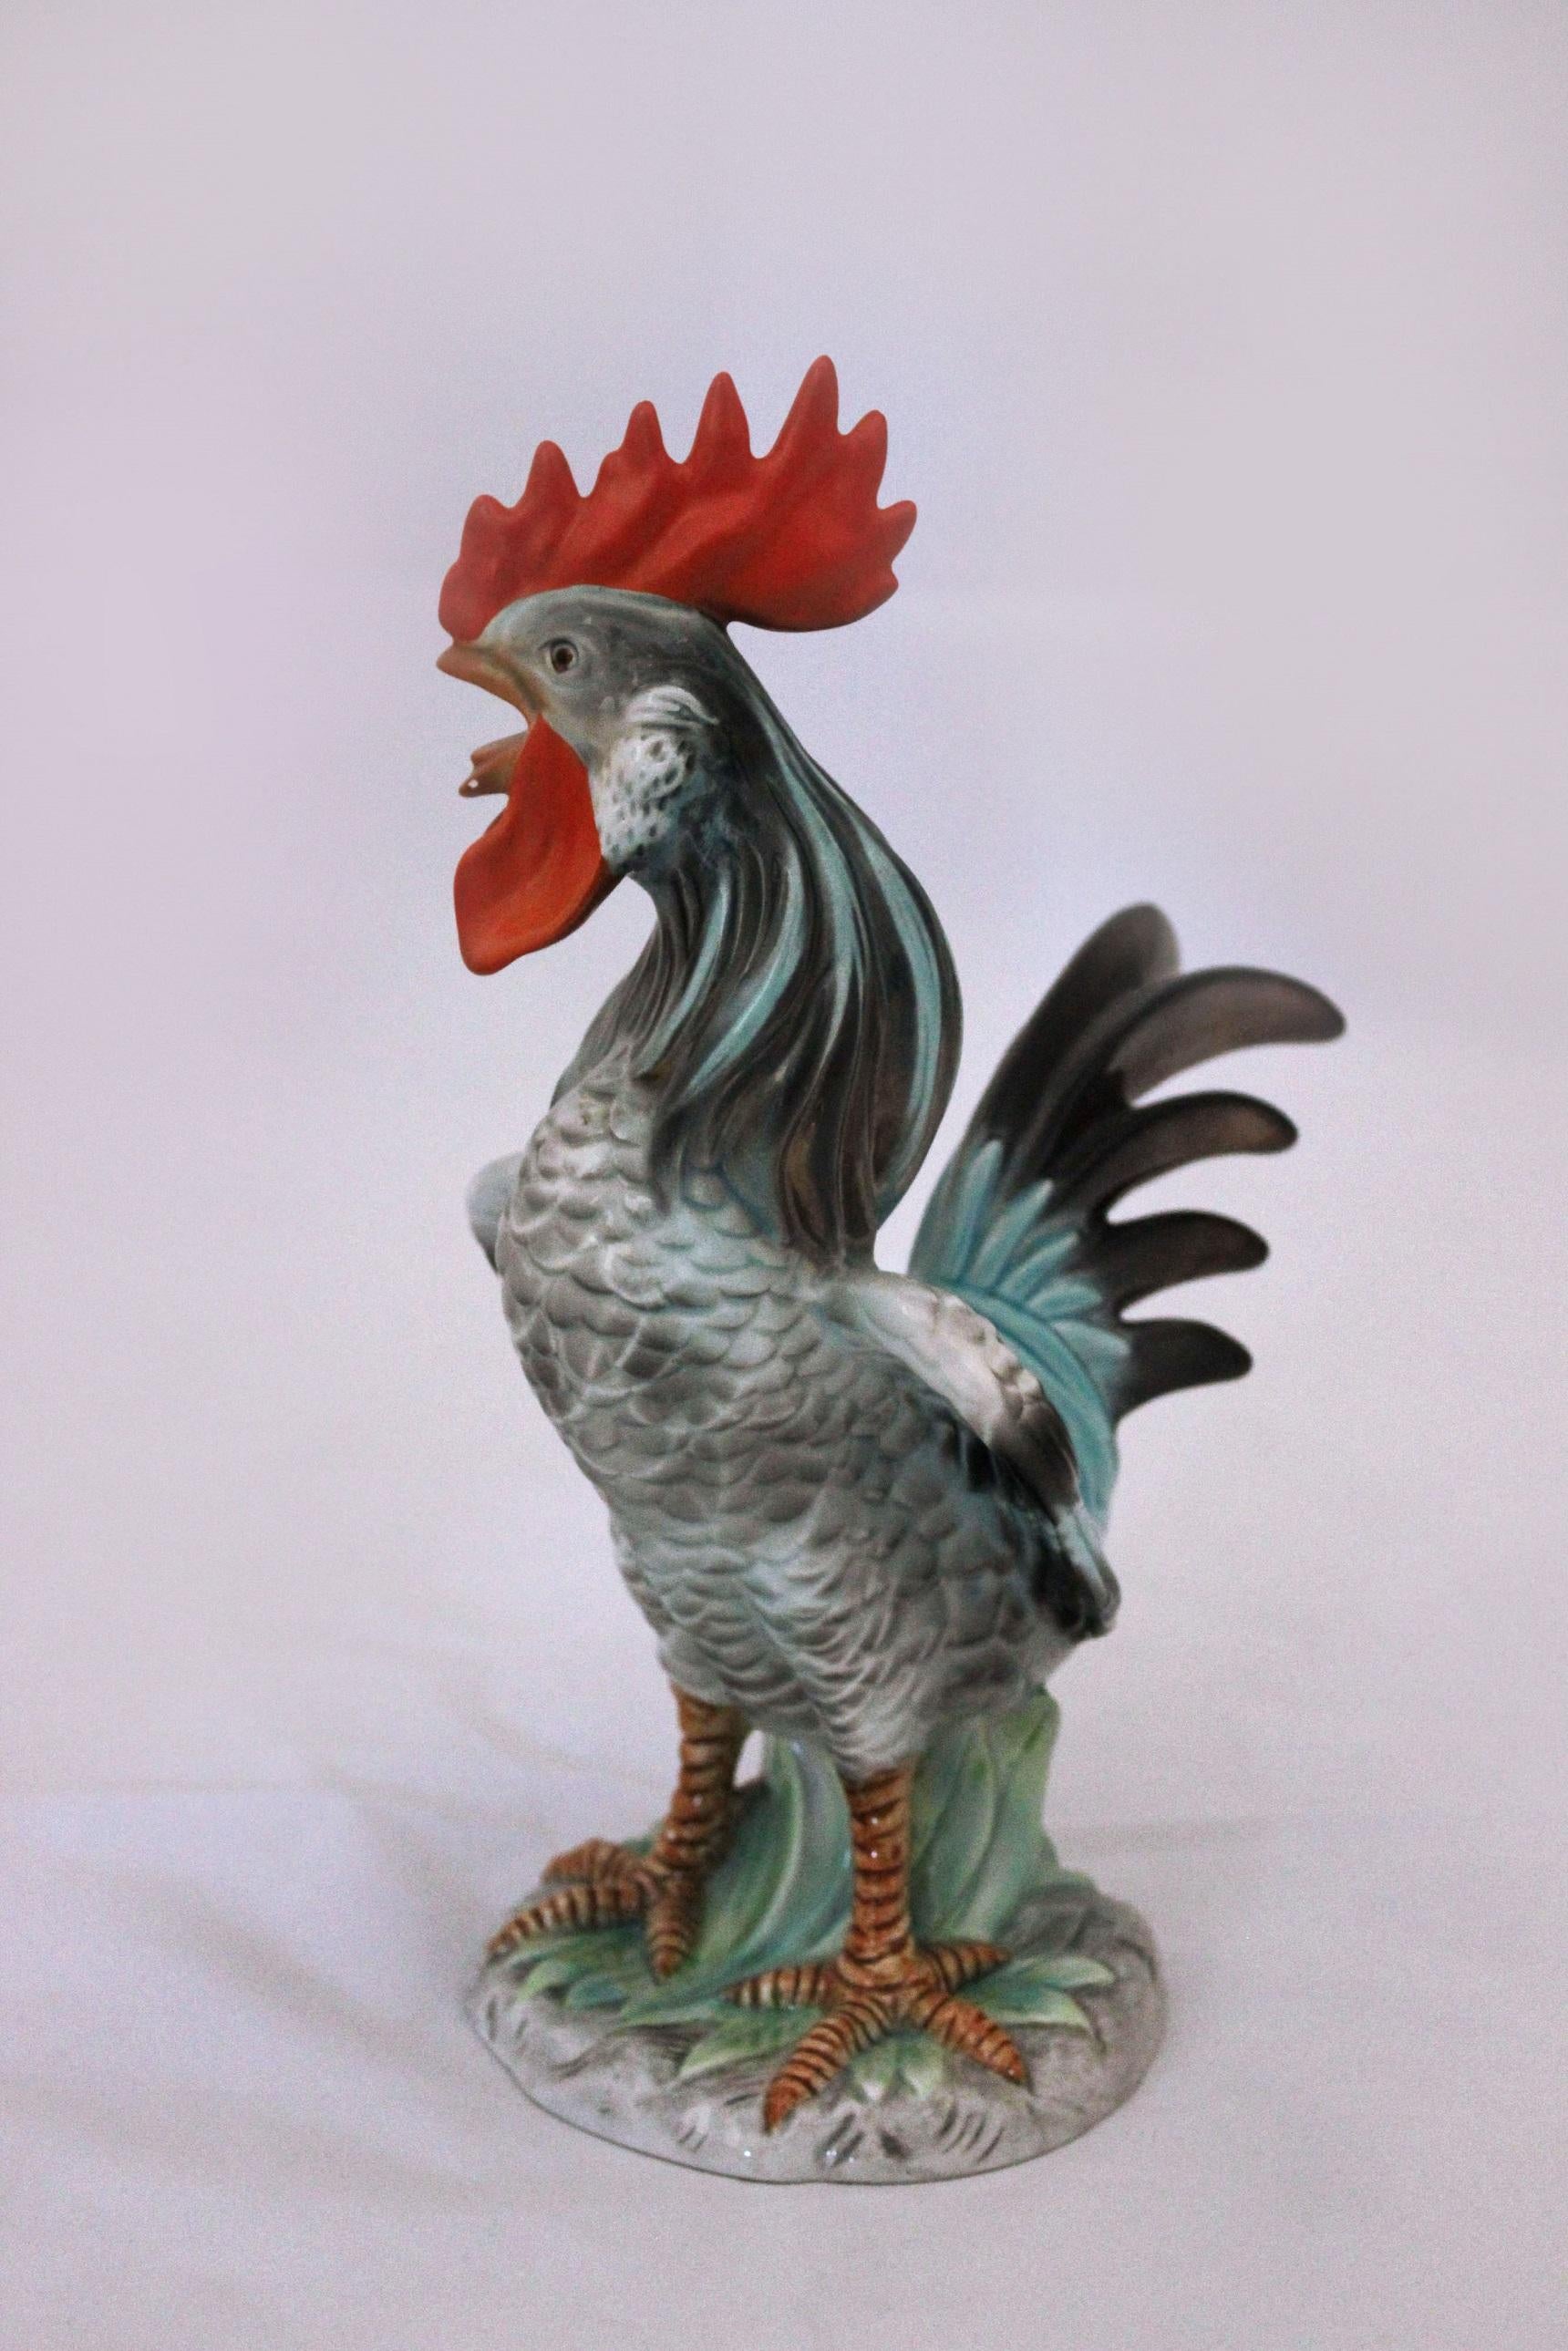 Ceramic rooster sculpture by Ronzan